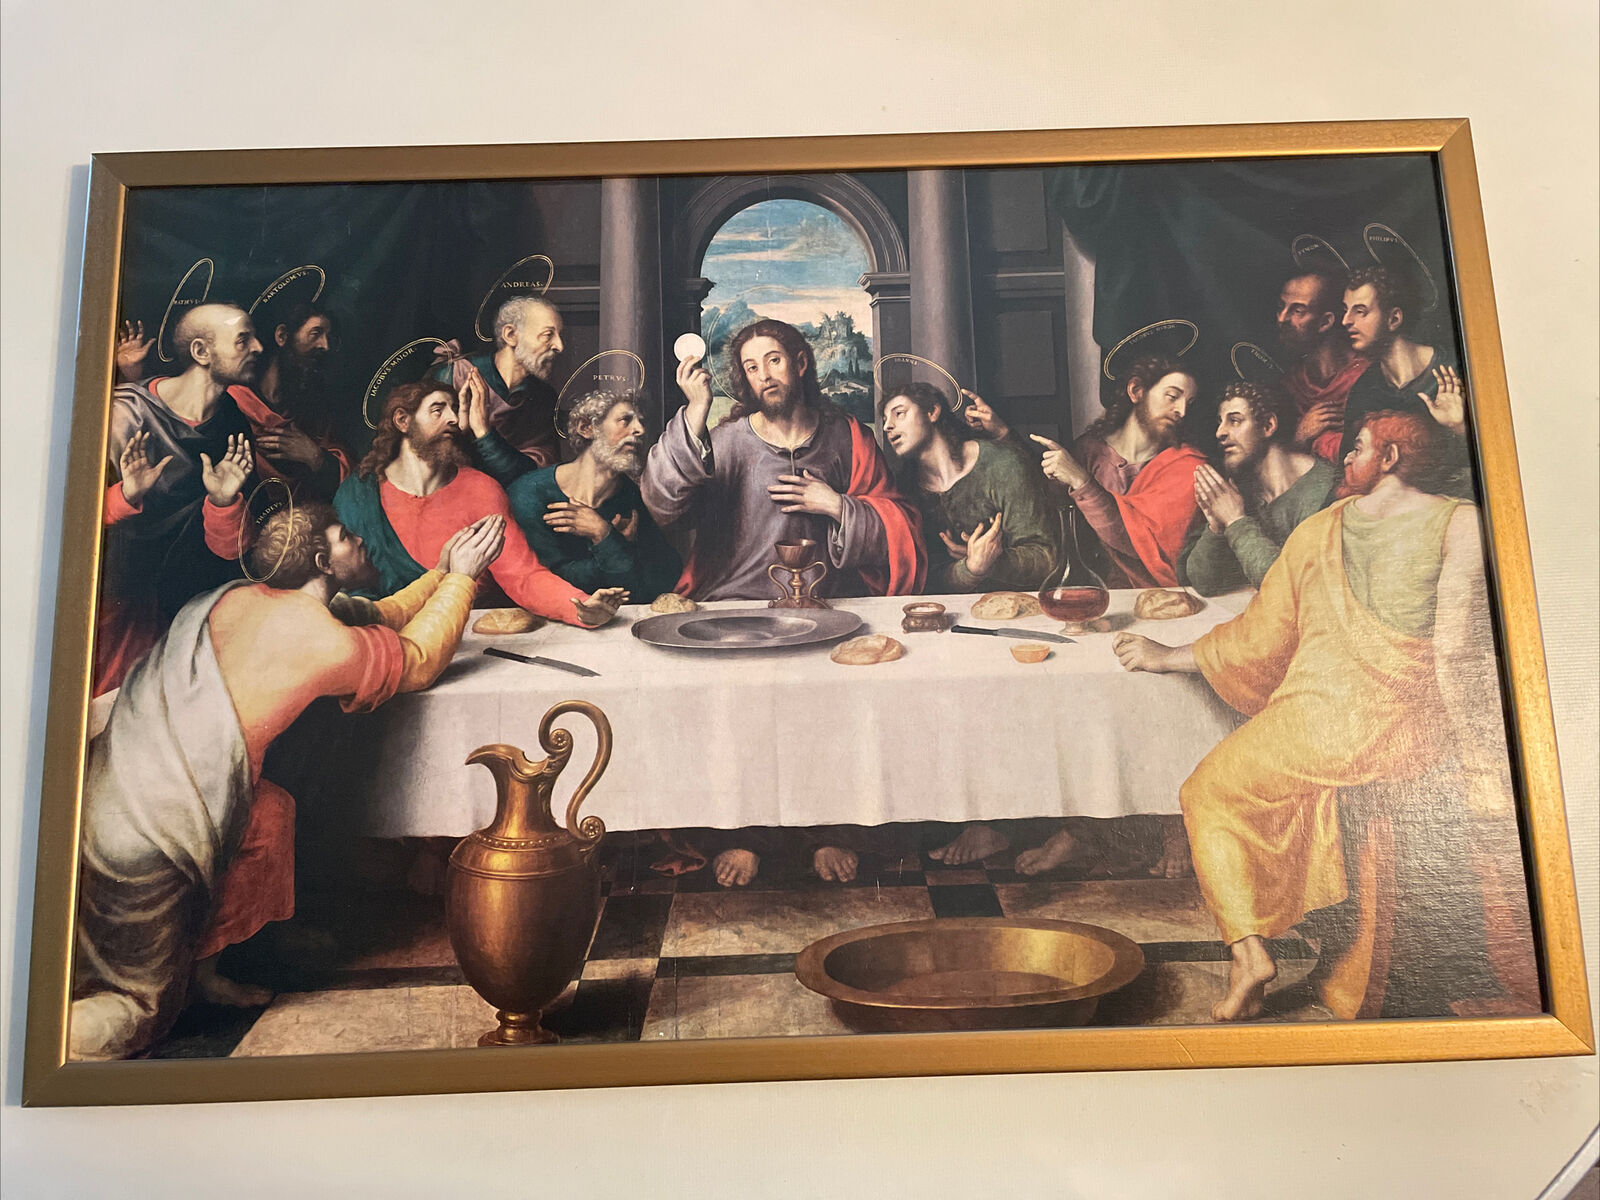 VINTAGE THE LAST SUPPER WOODEN FRAMED ART PRINT UNIQUE EARLY RELIGIOUS ART